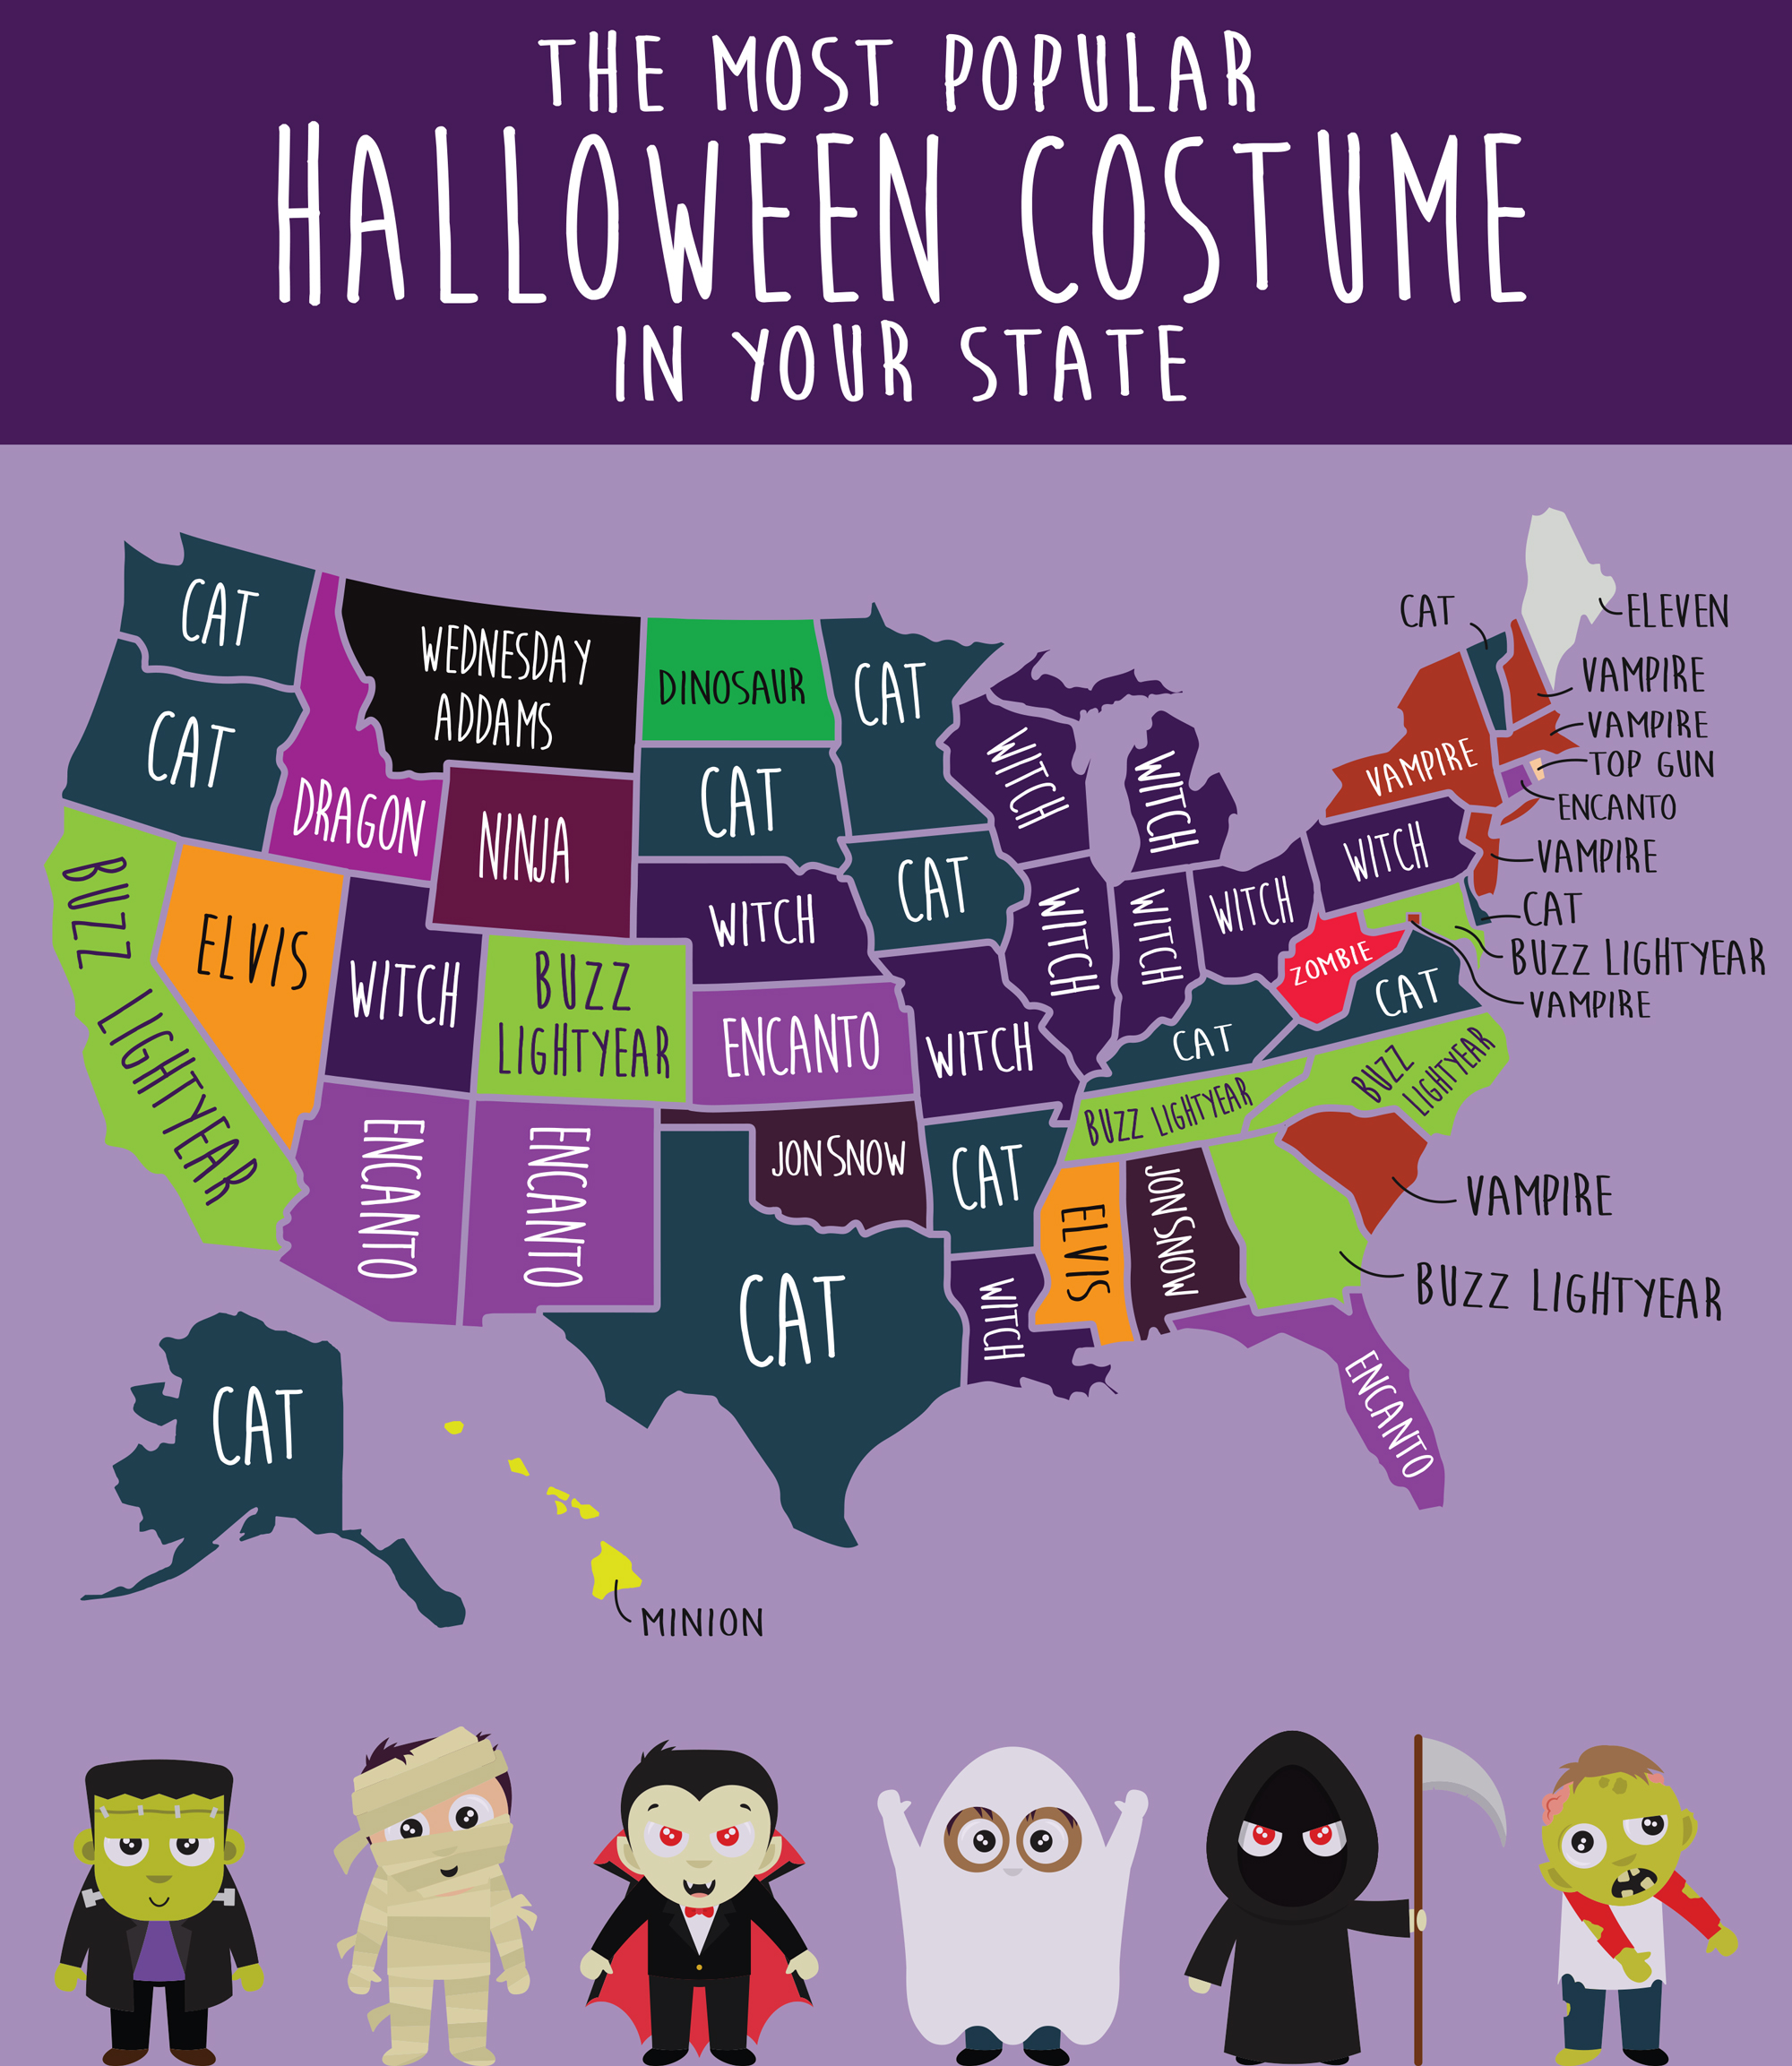 What is the most popular halloween costume